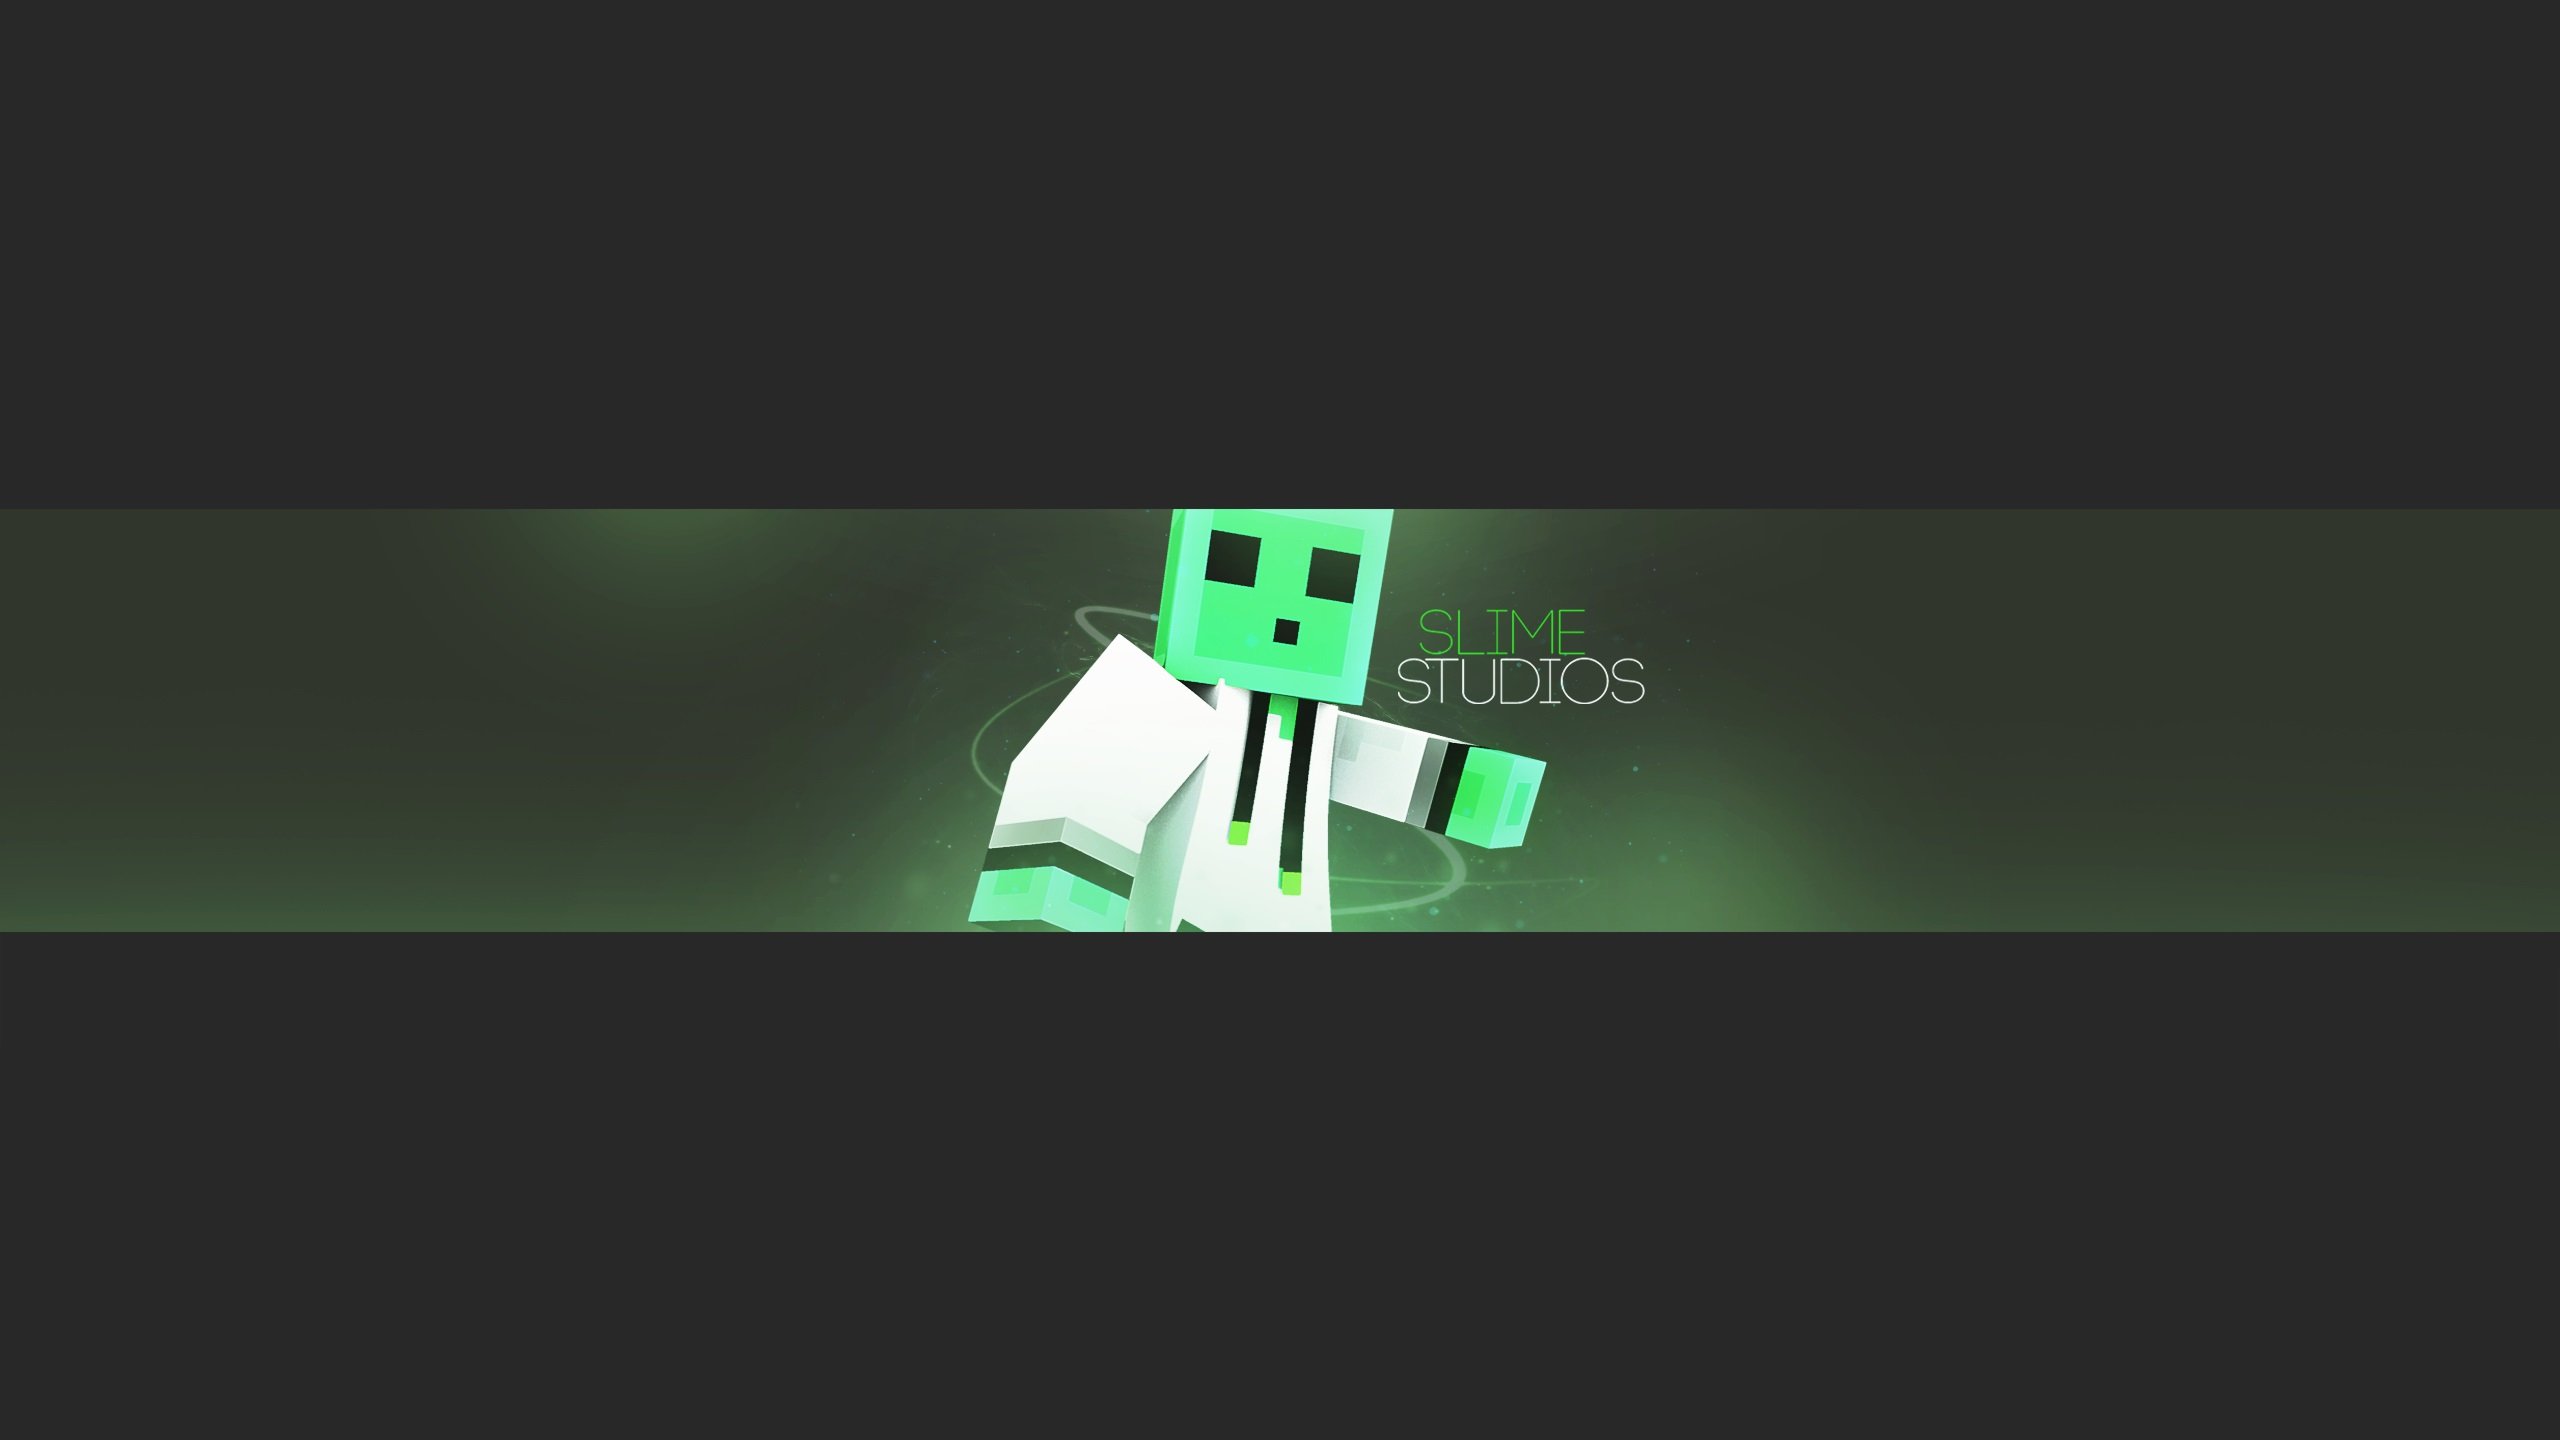 Artwork Free Youtube Art Need 50 Subs Giving Banners Profile Pics To Staff Free Cubecraft Games